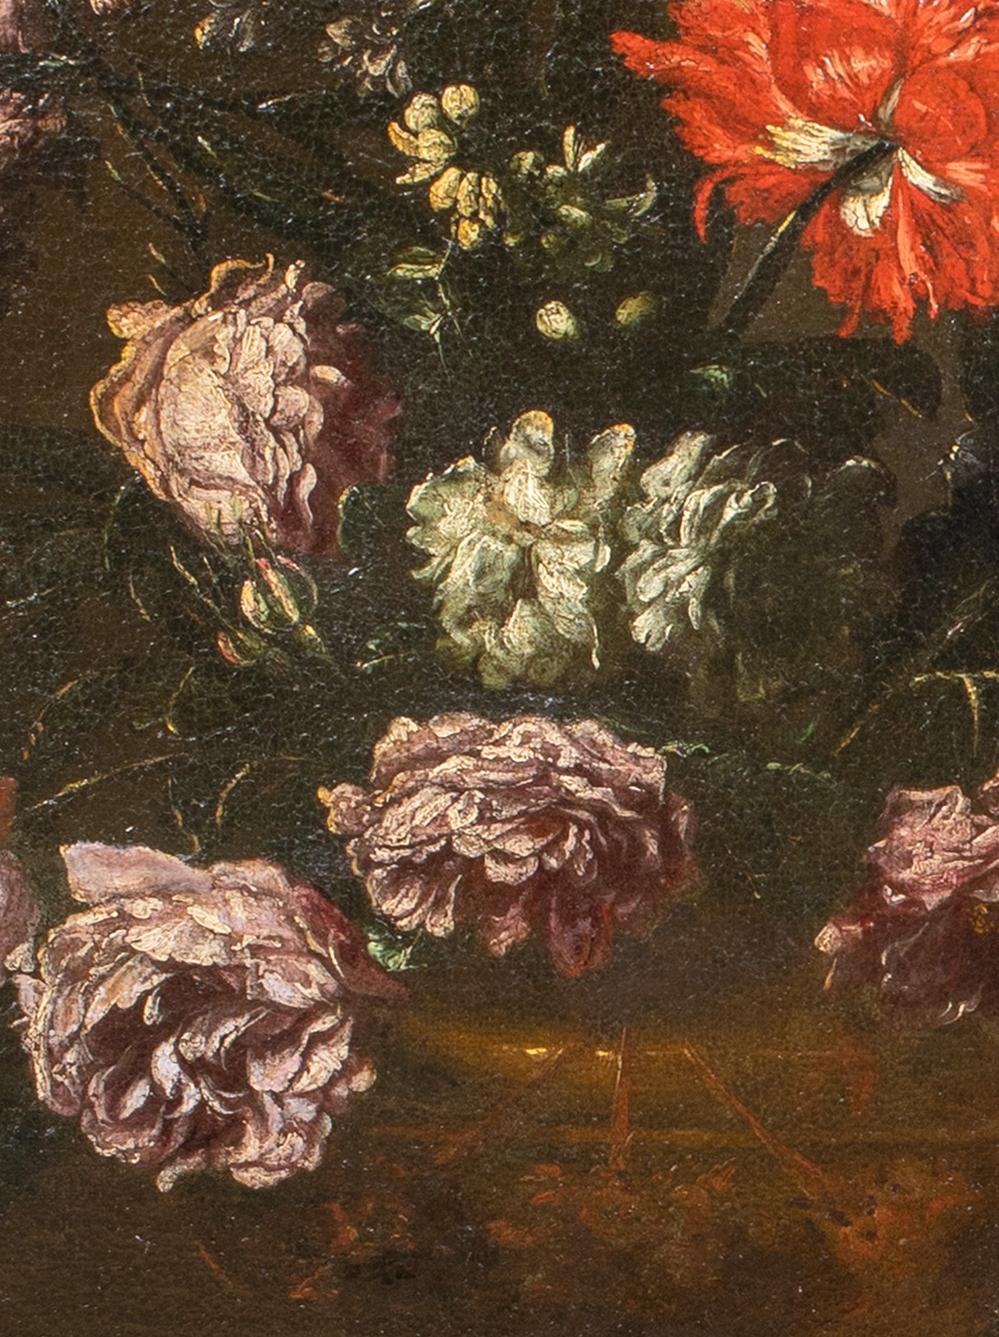 Still Life Of Flowers & A Parrot

School of Andrea BELVEDERE (1652-1732) 

Large 19th Century Italian old Master Still Life of flowers and a parrot, oil on canvas. Excellent quality and condition circa 1690 study of various flowers in a vase upon a